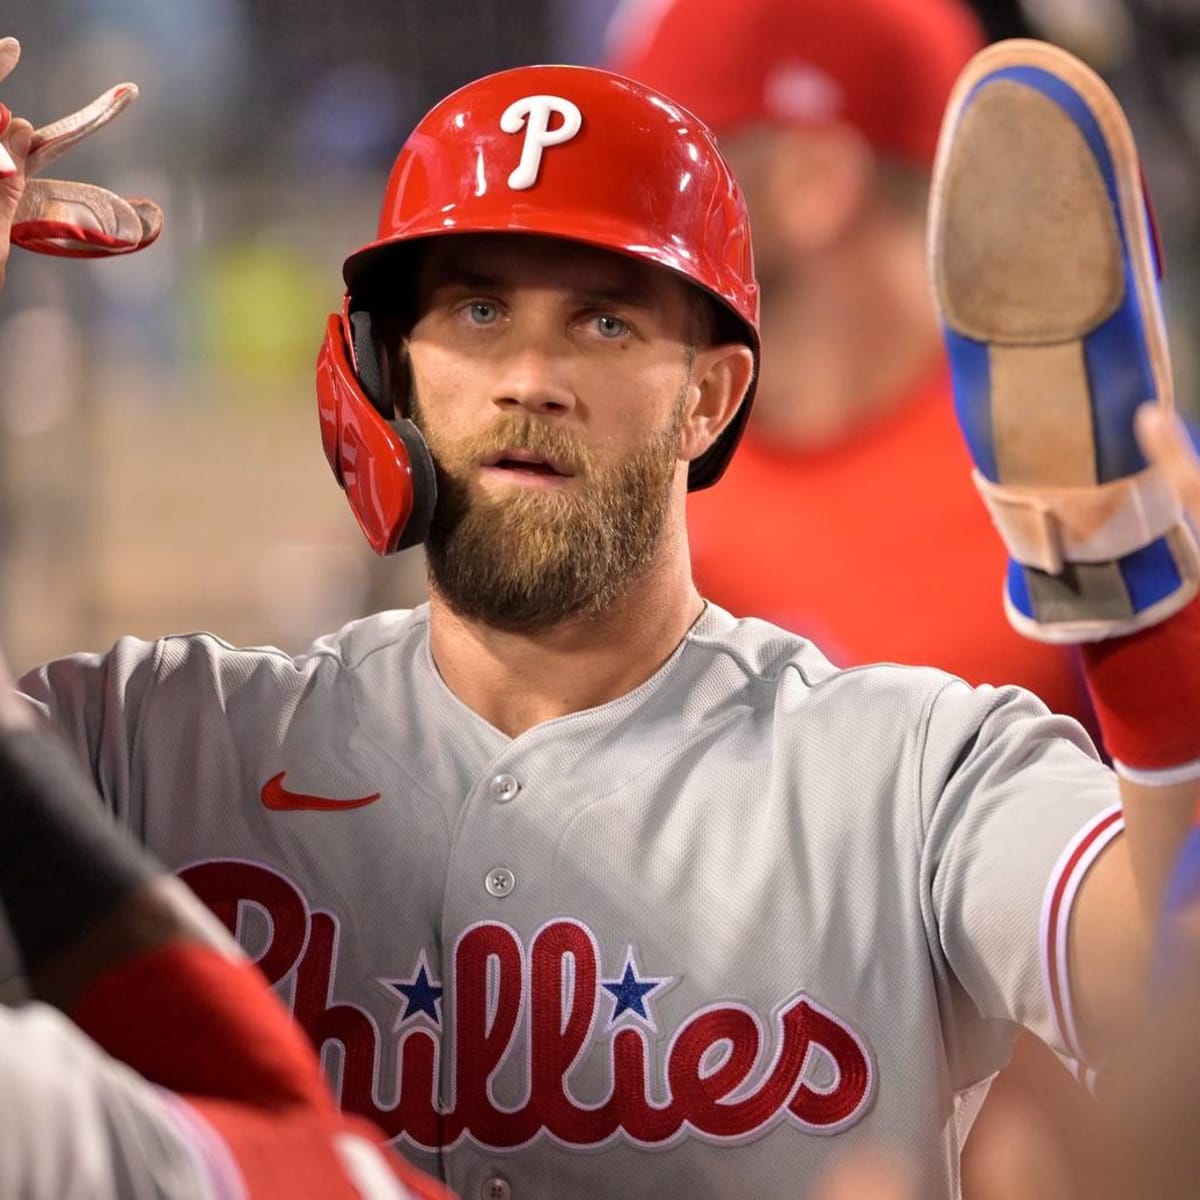 Bryce Harper strikeout: Phillies star never takes the bat off his shoulder  in baffling at-bat - DraftKings Network